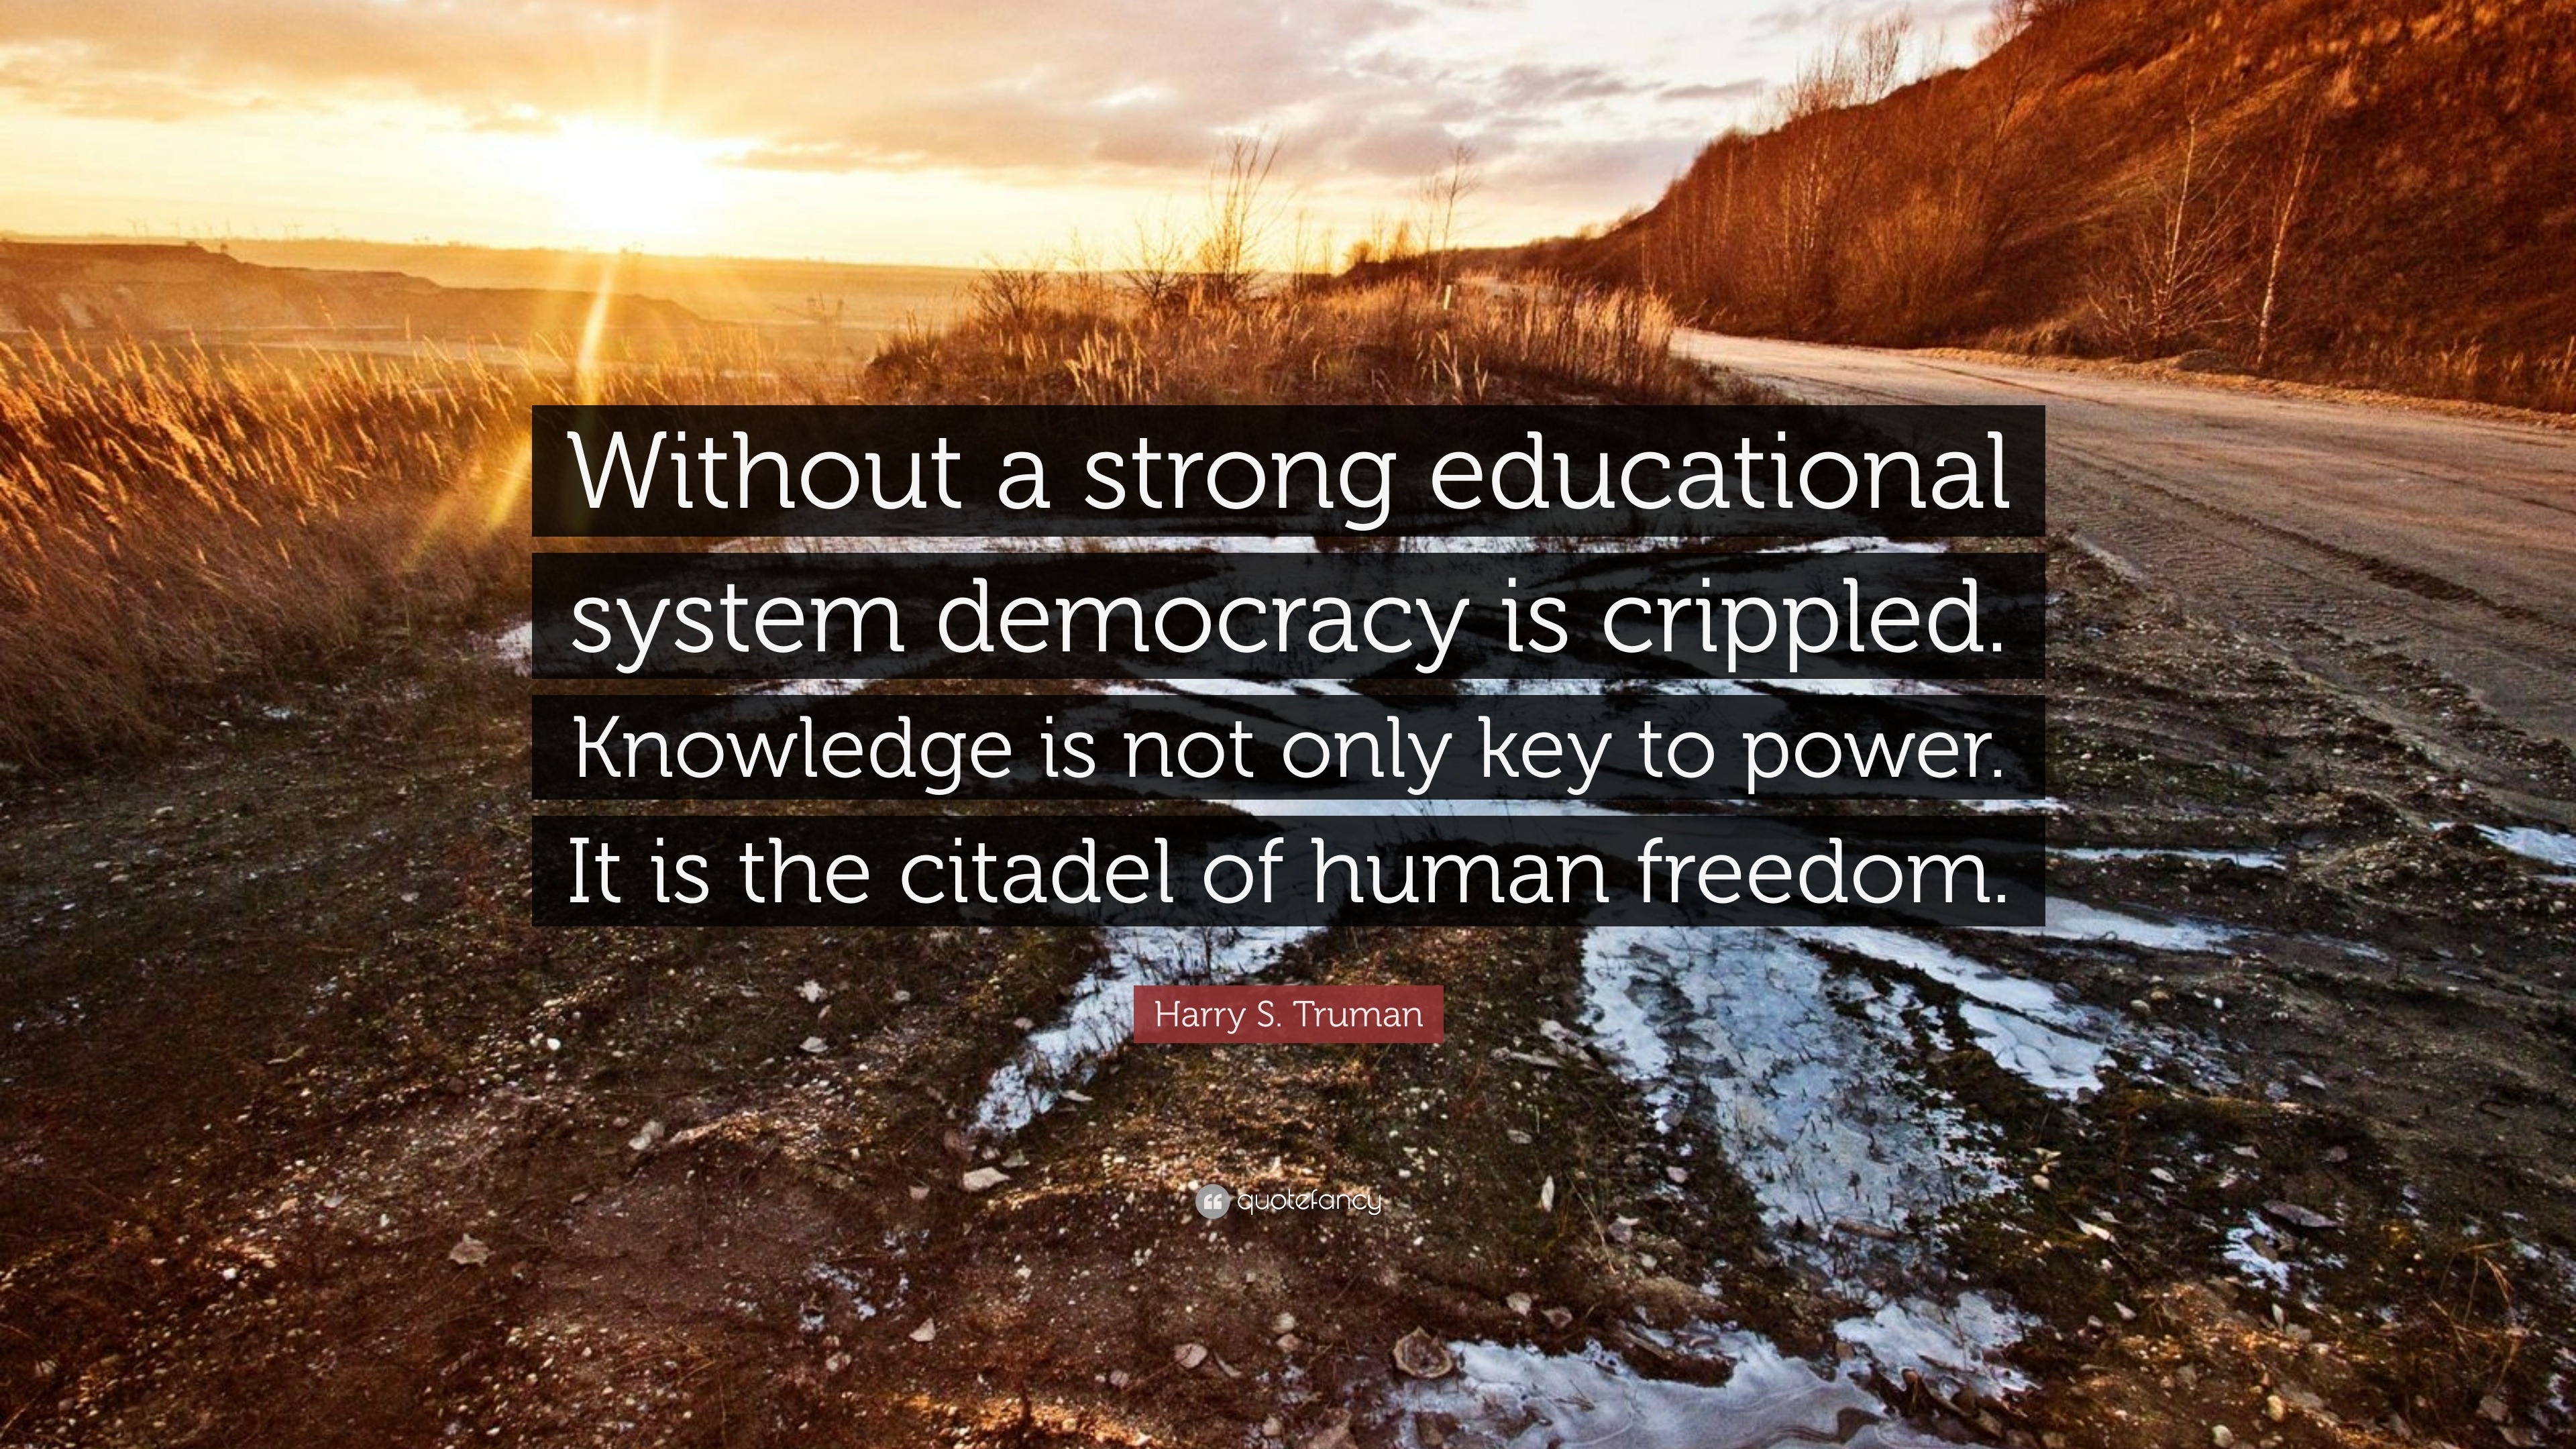 education is power quote